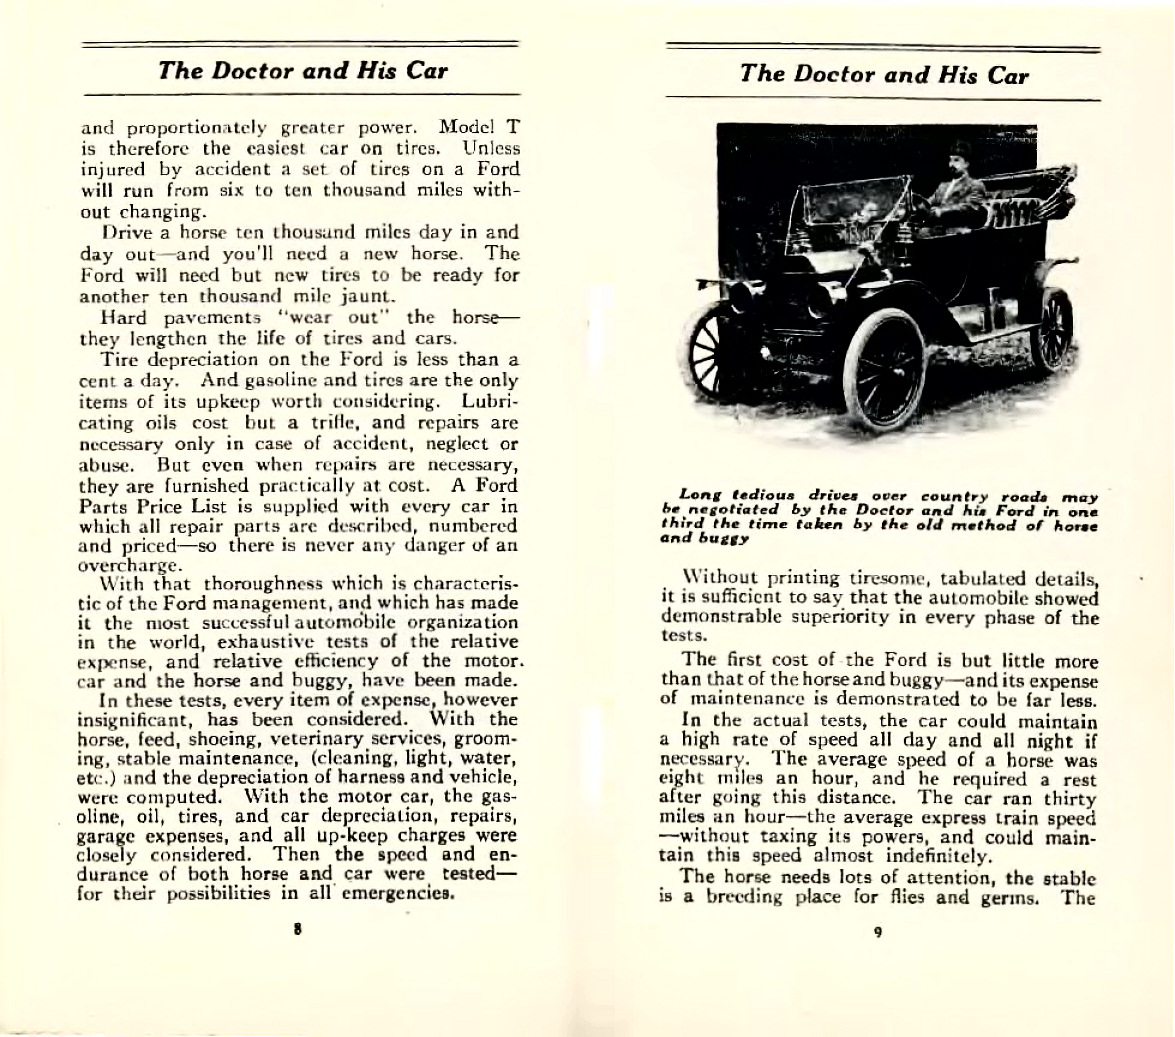 1911-The_Doctor__His_Car-08-09